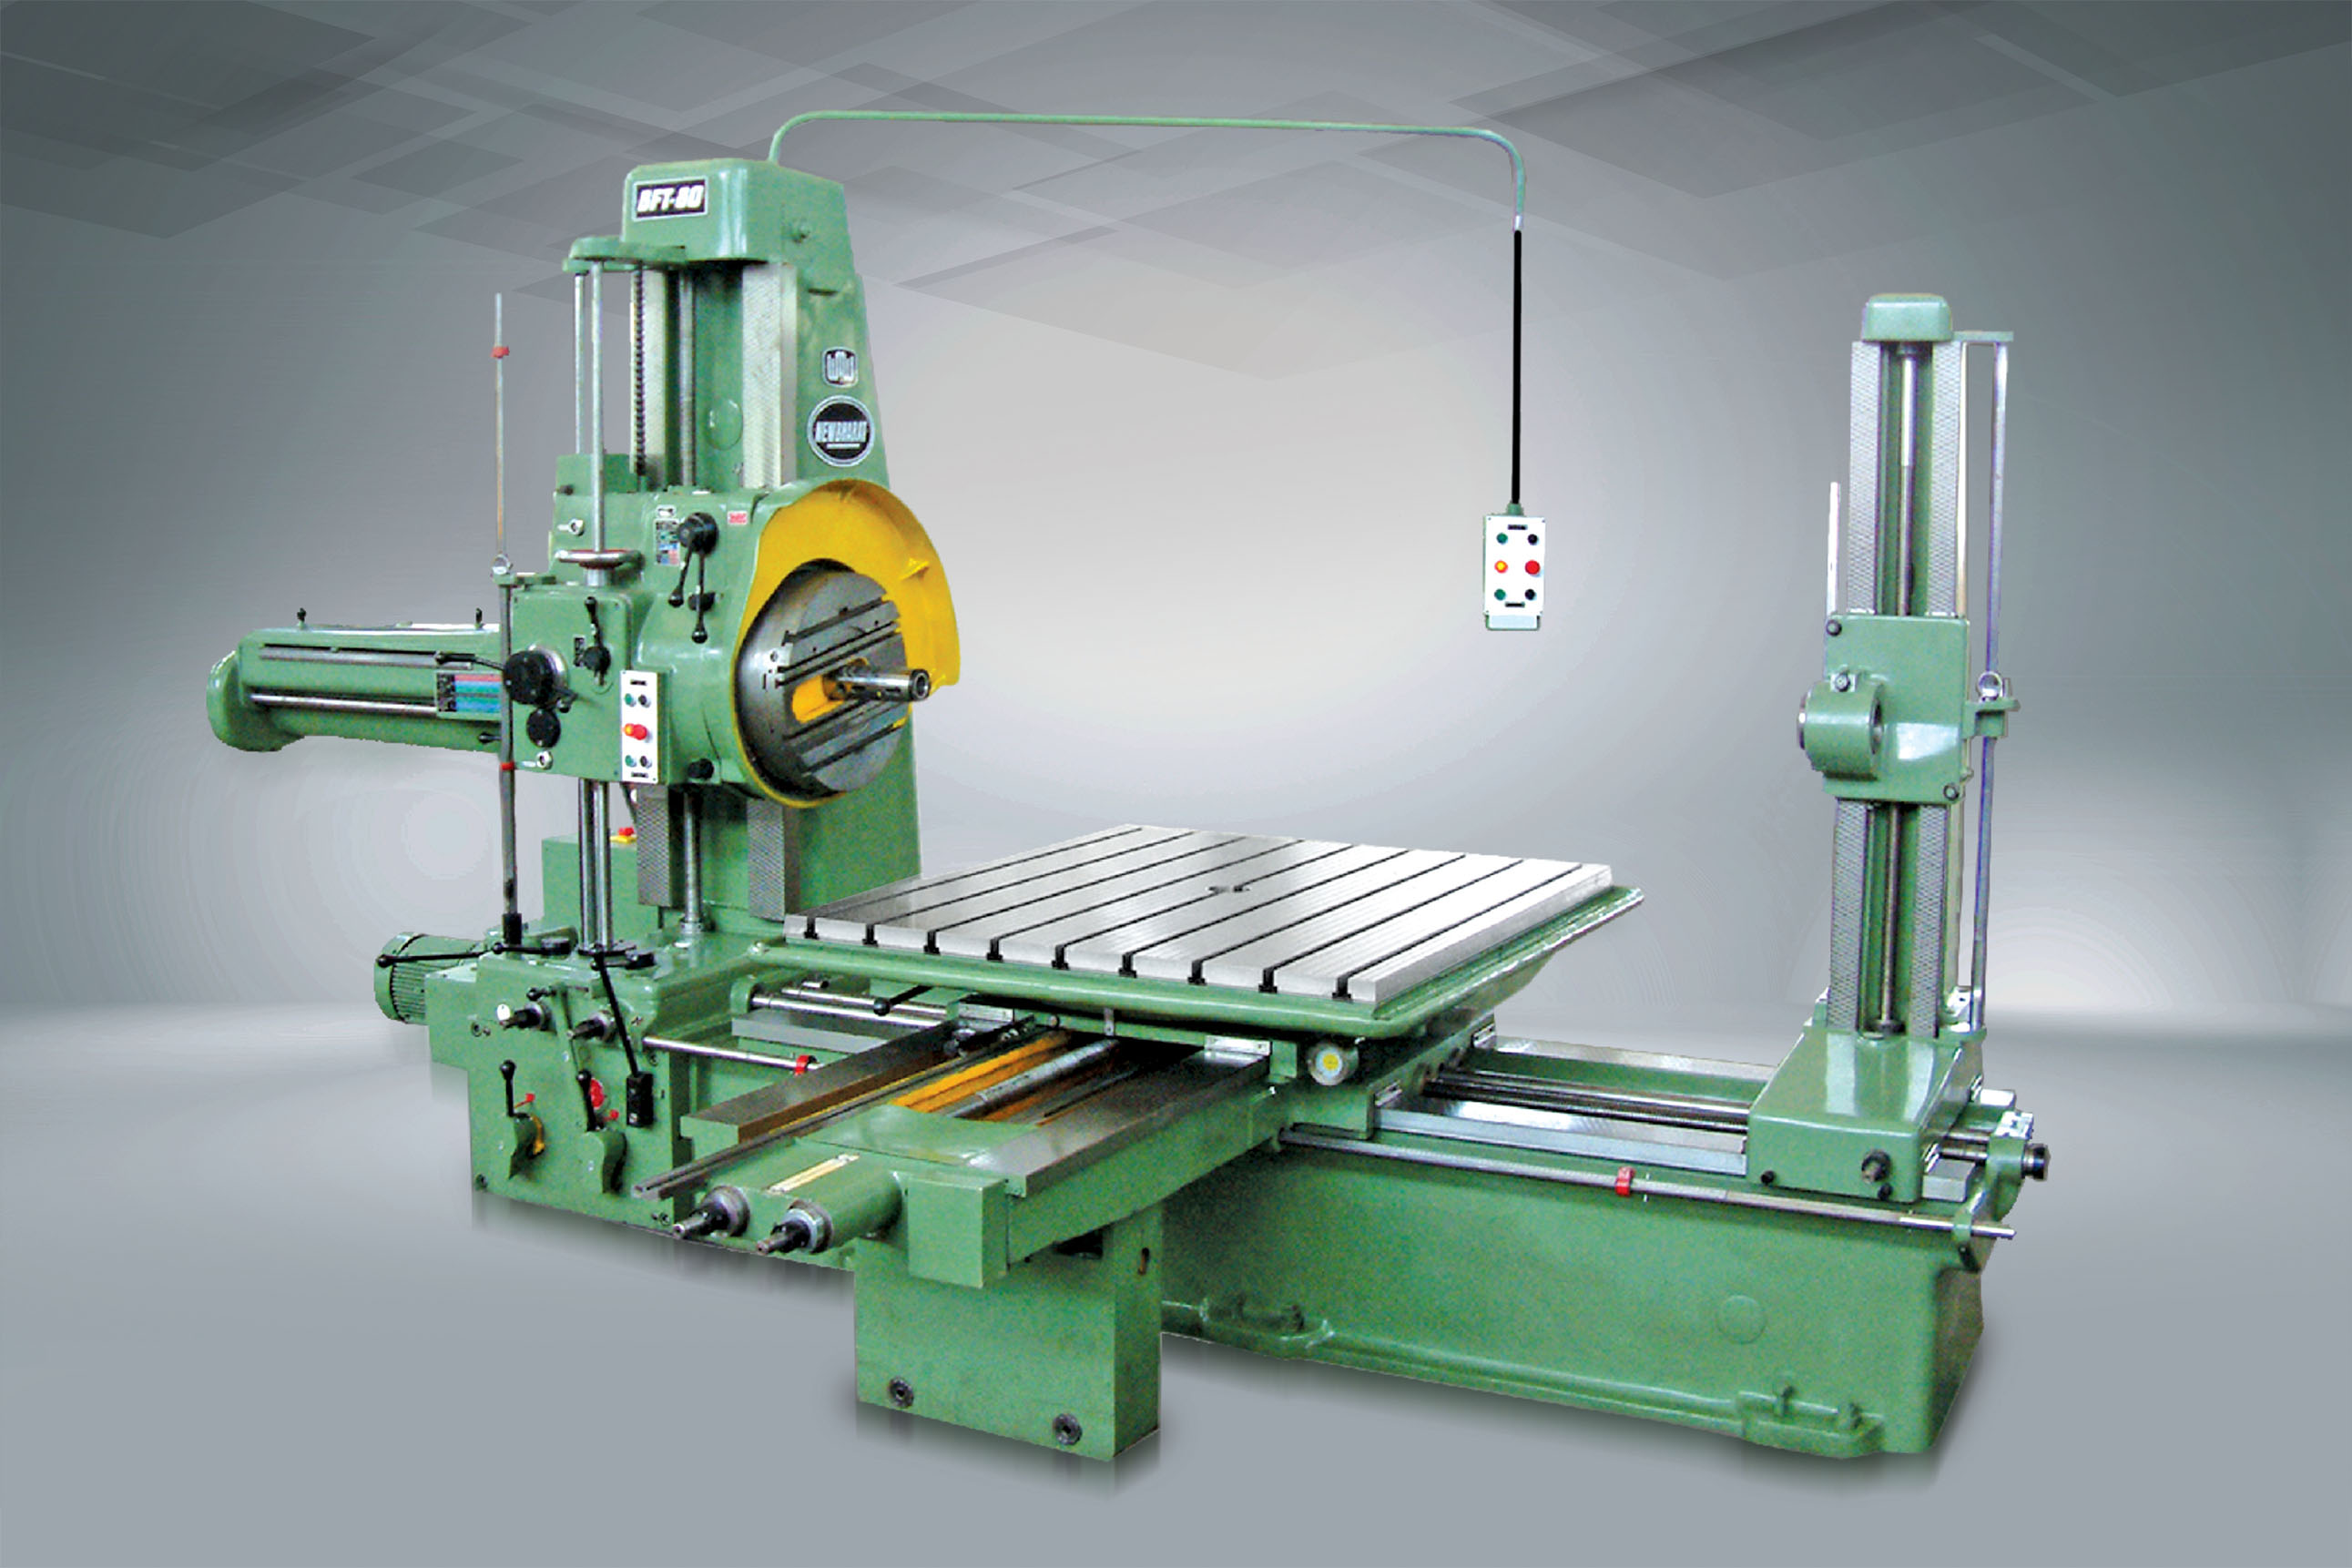 Table Type Horizontal Boring and Milling Machine